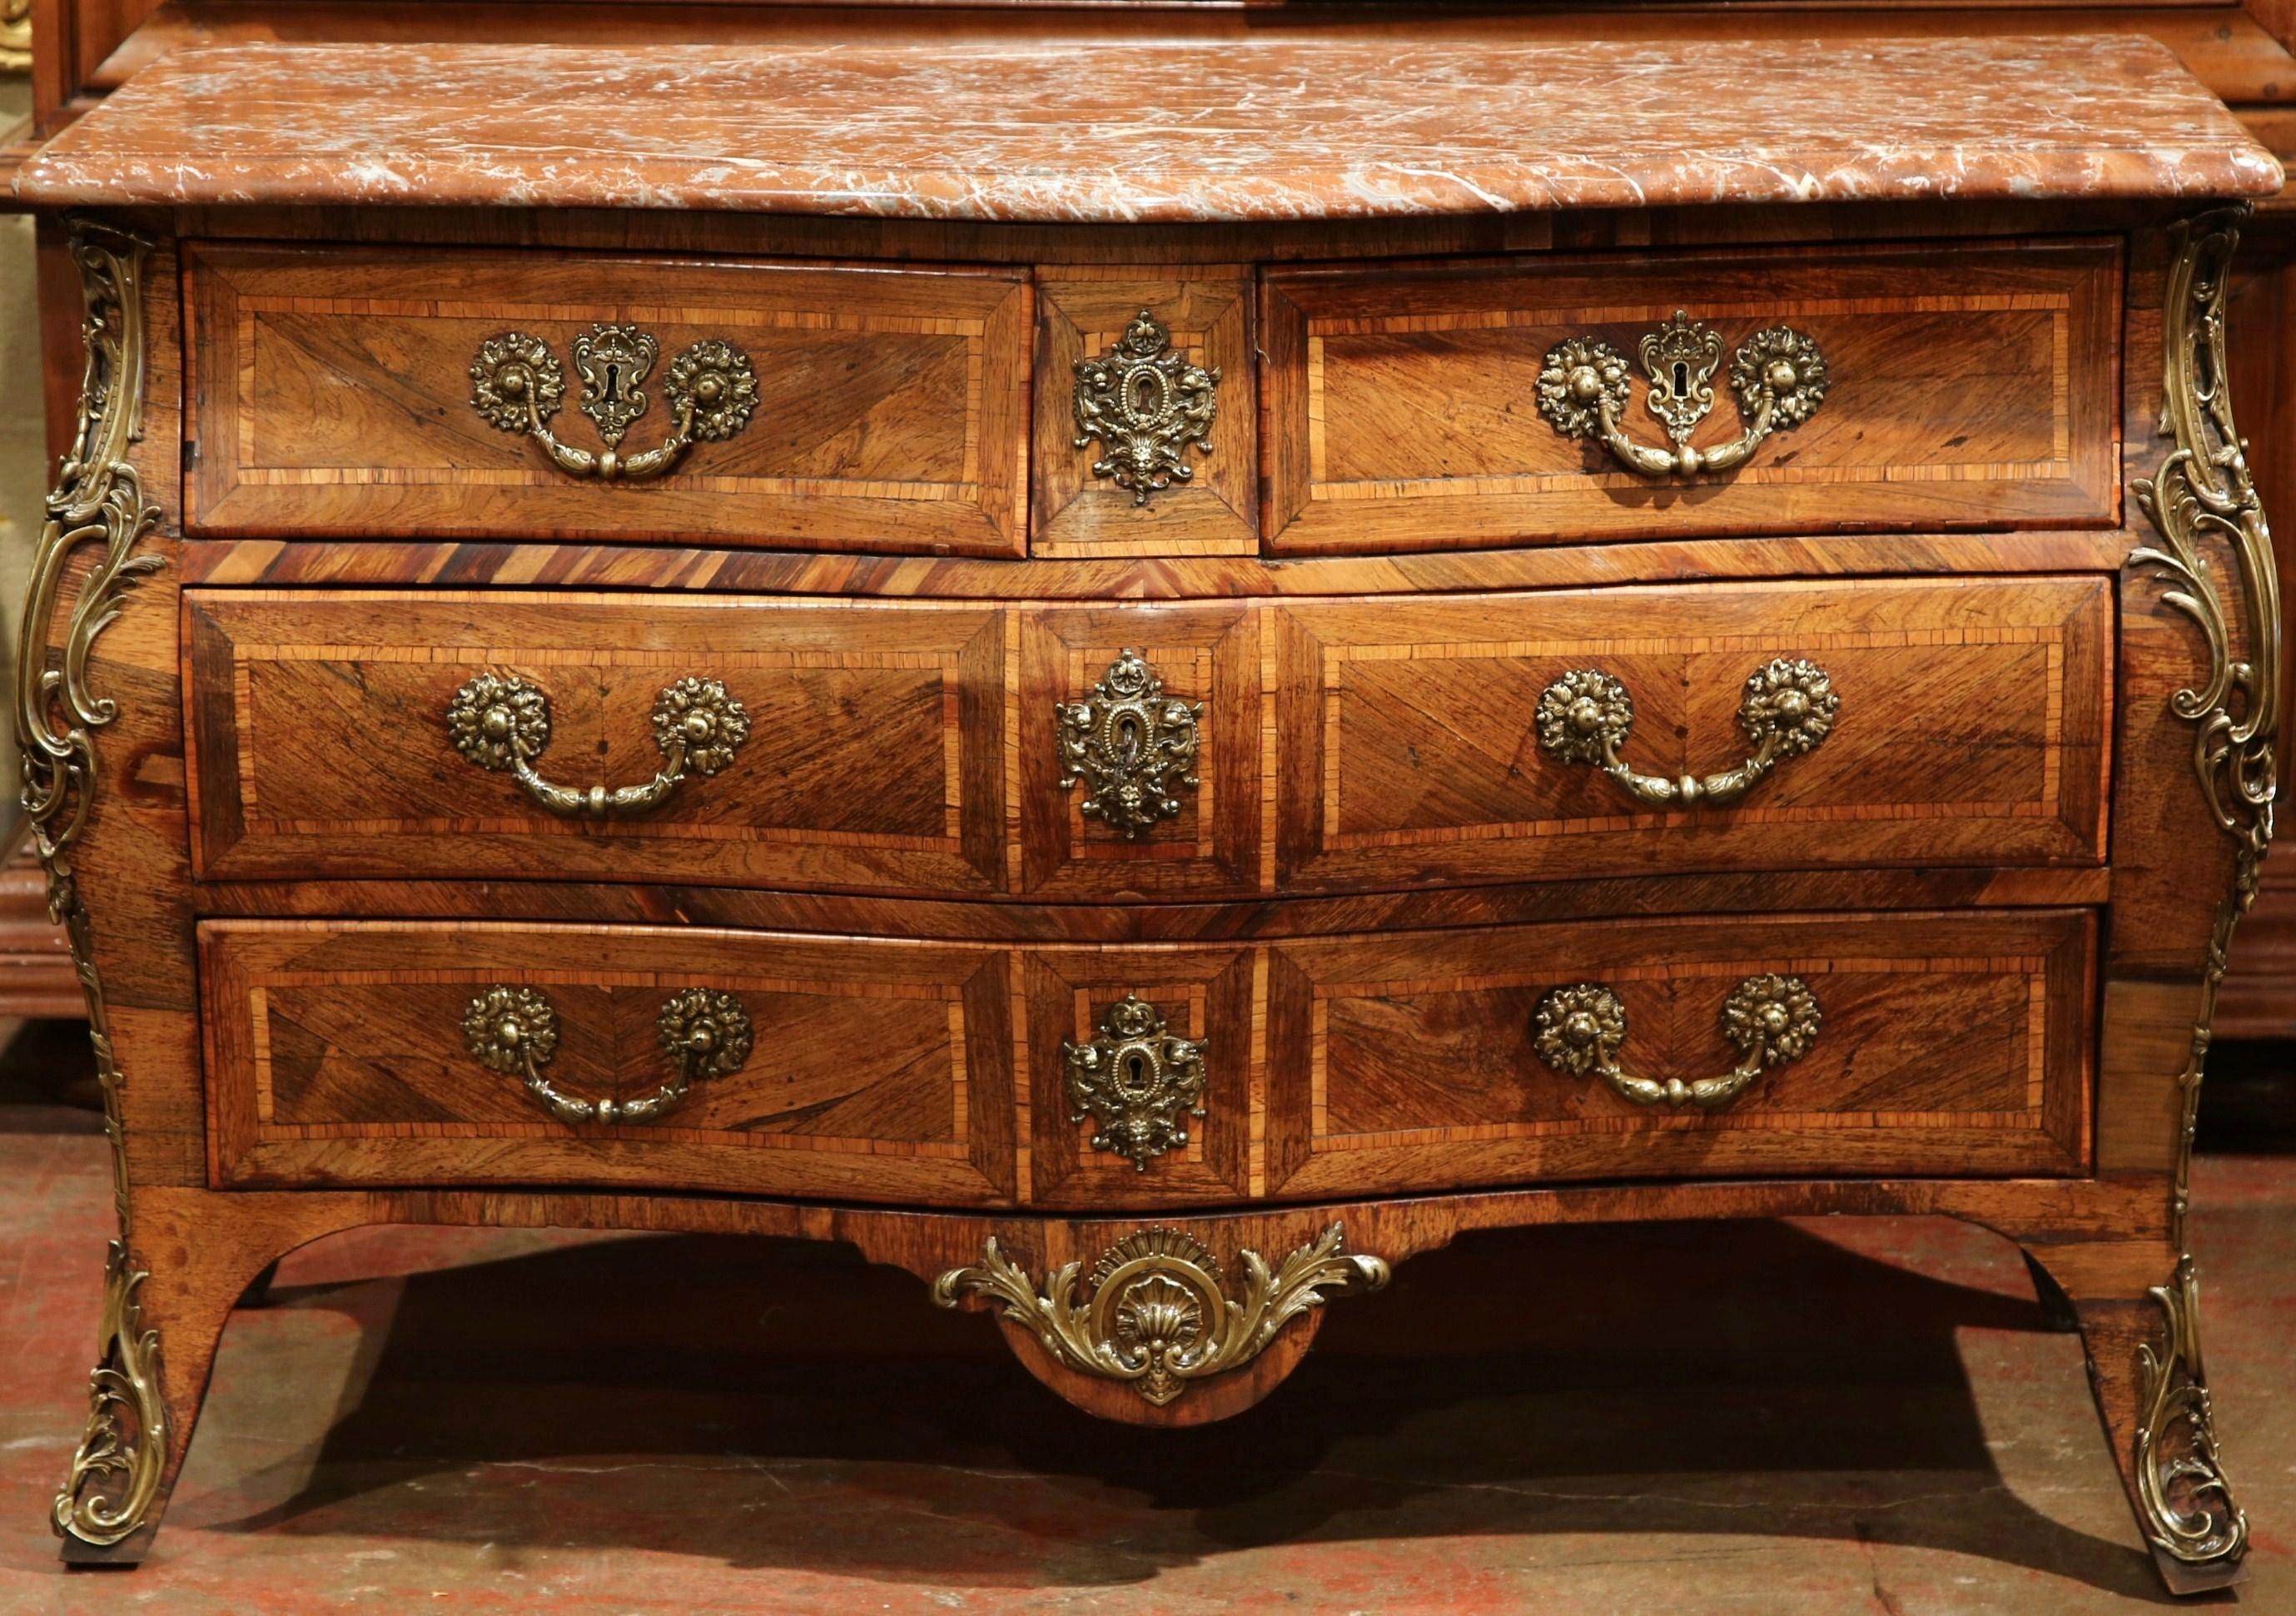 Crafted in Burgundy France circa 1750, the antique fruitwood commode stands on curved feet ending with bronze mounts over a he scalloped apron decorated with a bronze shell and leaf motif mount. The chest features three rows across with four bombe